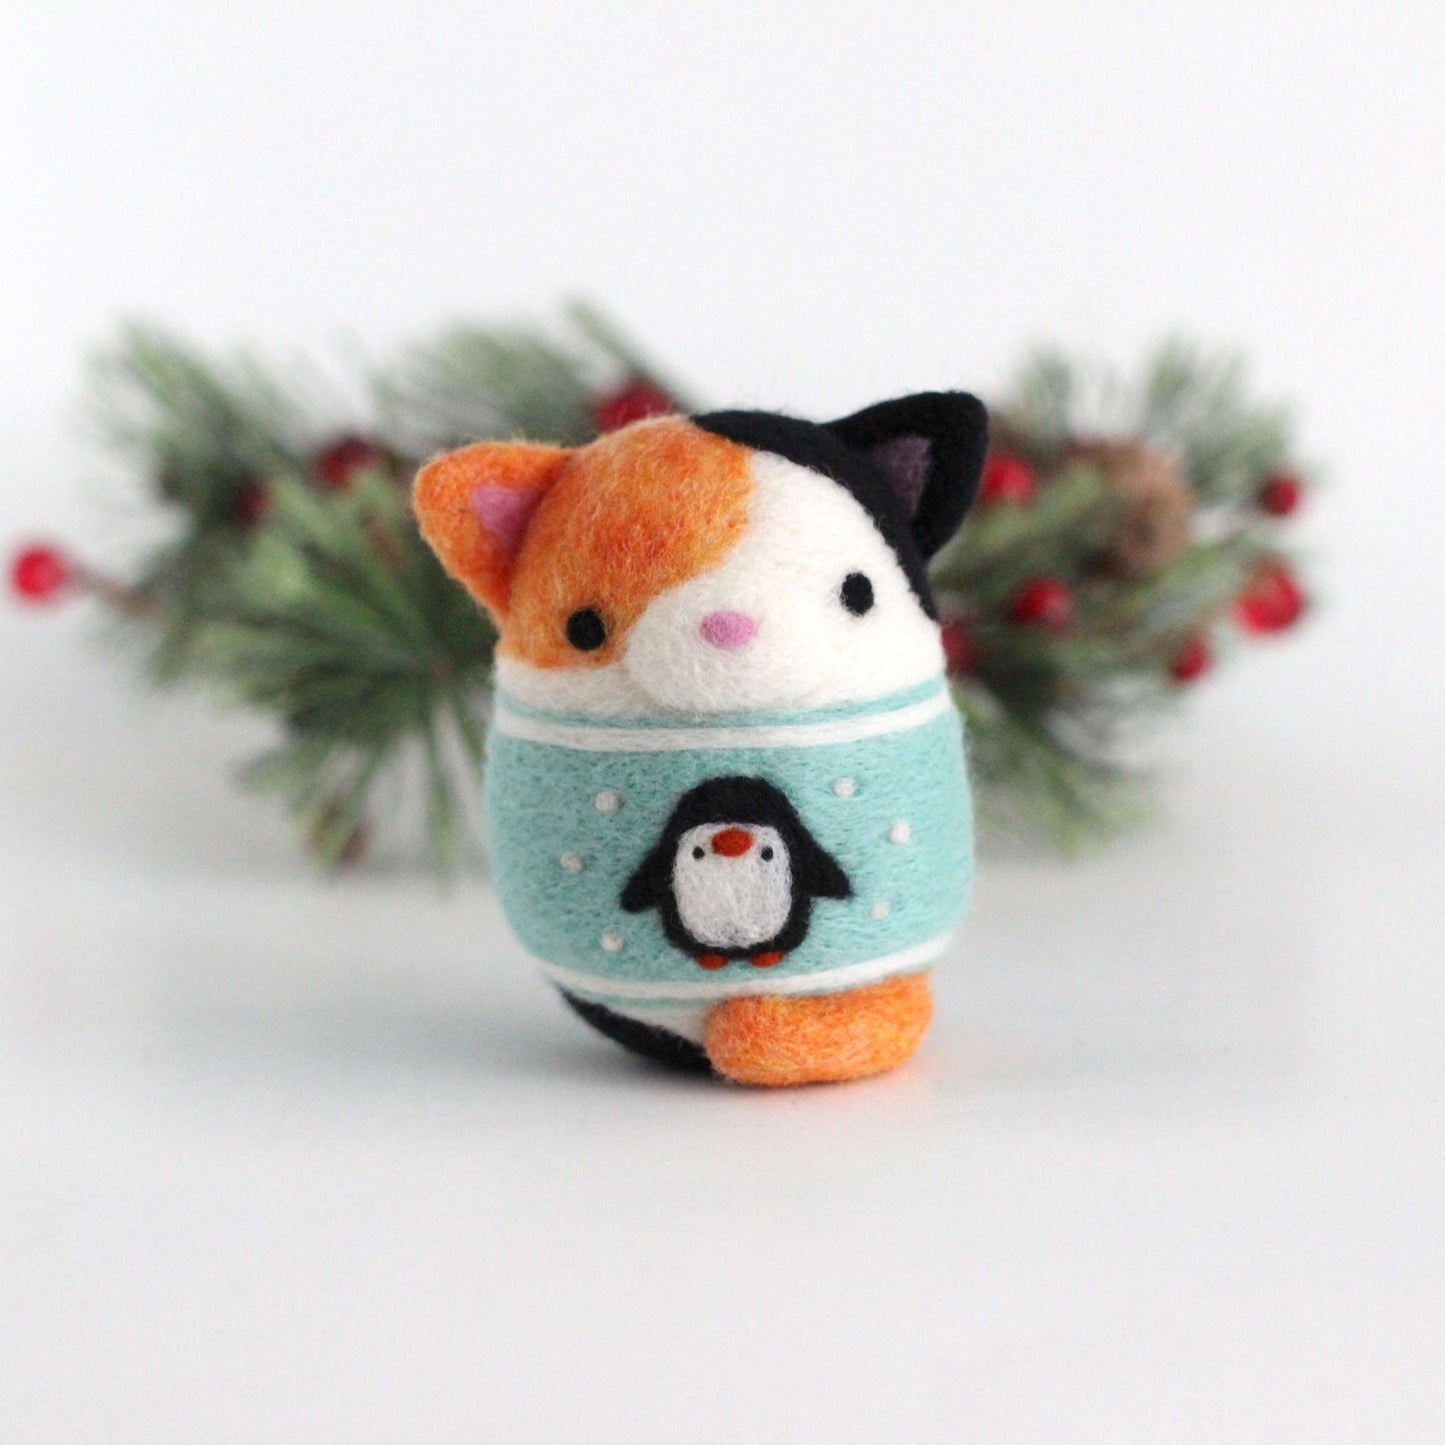 Needle Felted Calico Cat in Penguin Christmas Sweater by Wild Whimsy Woolies